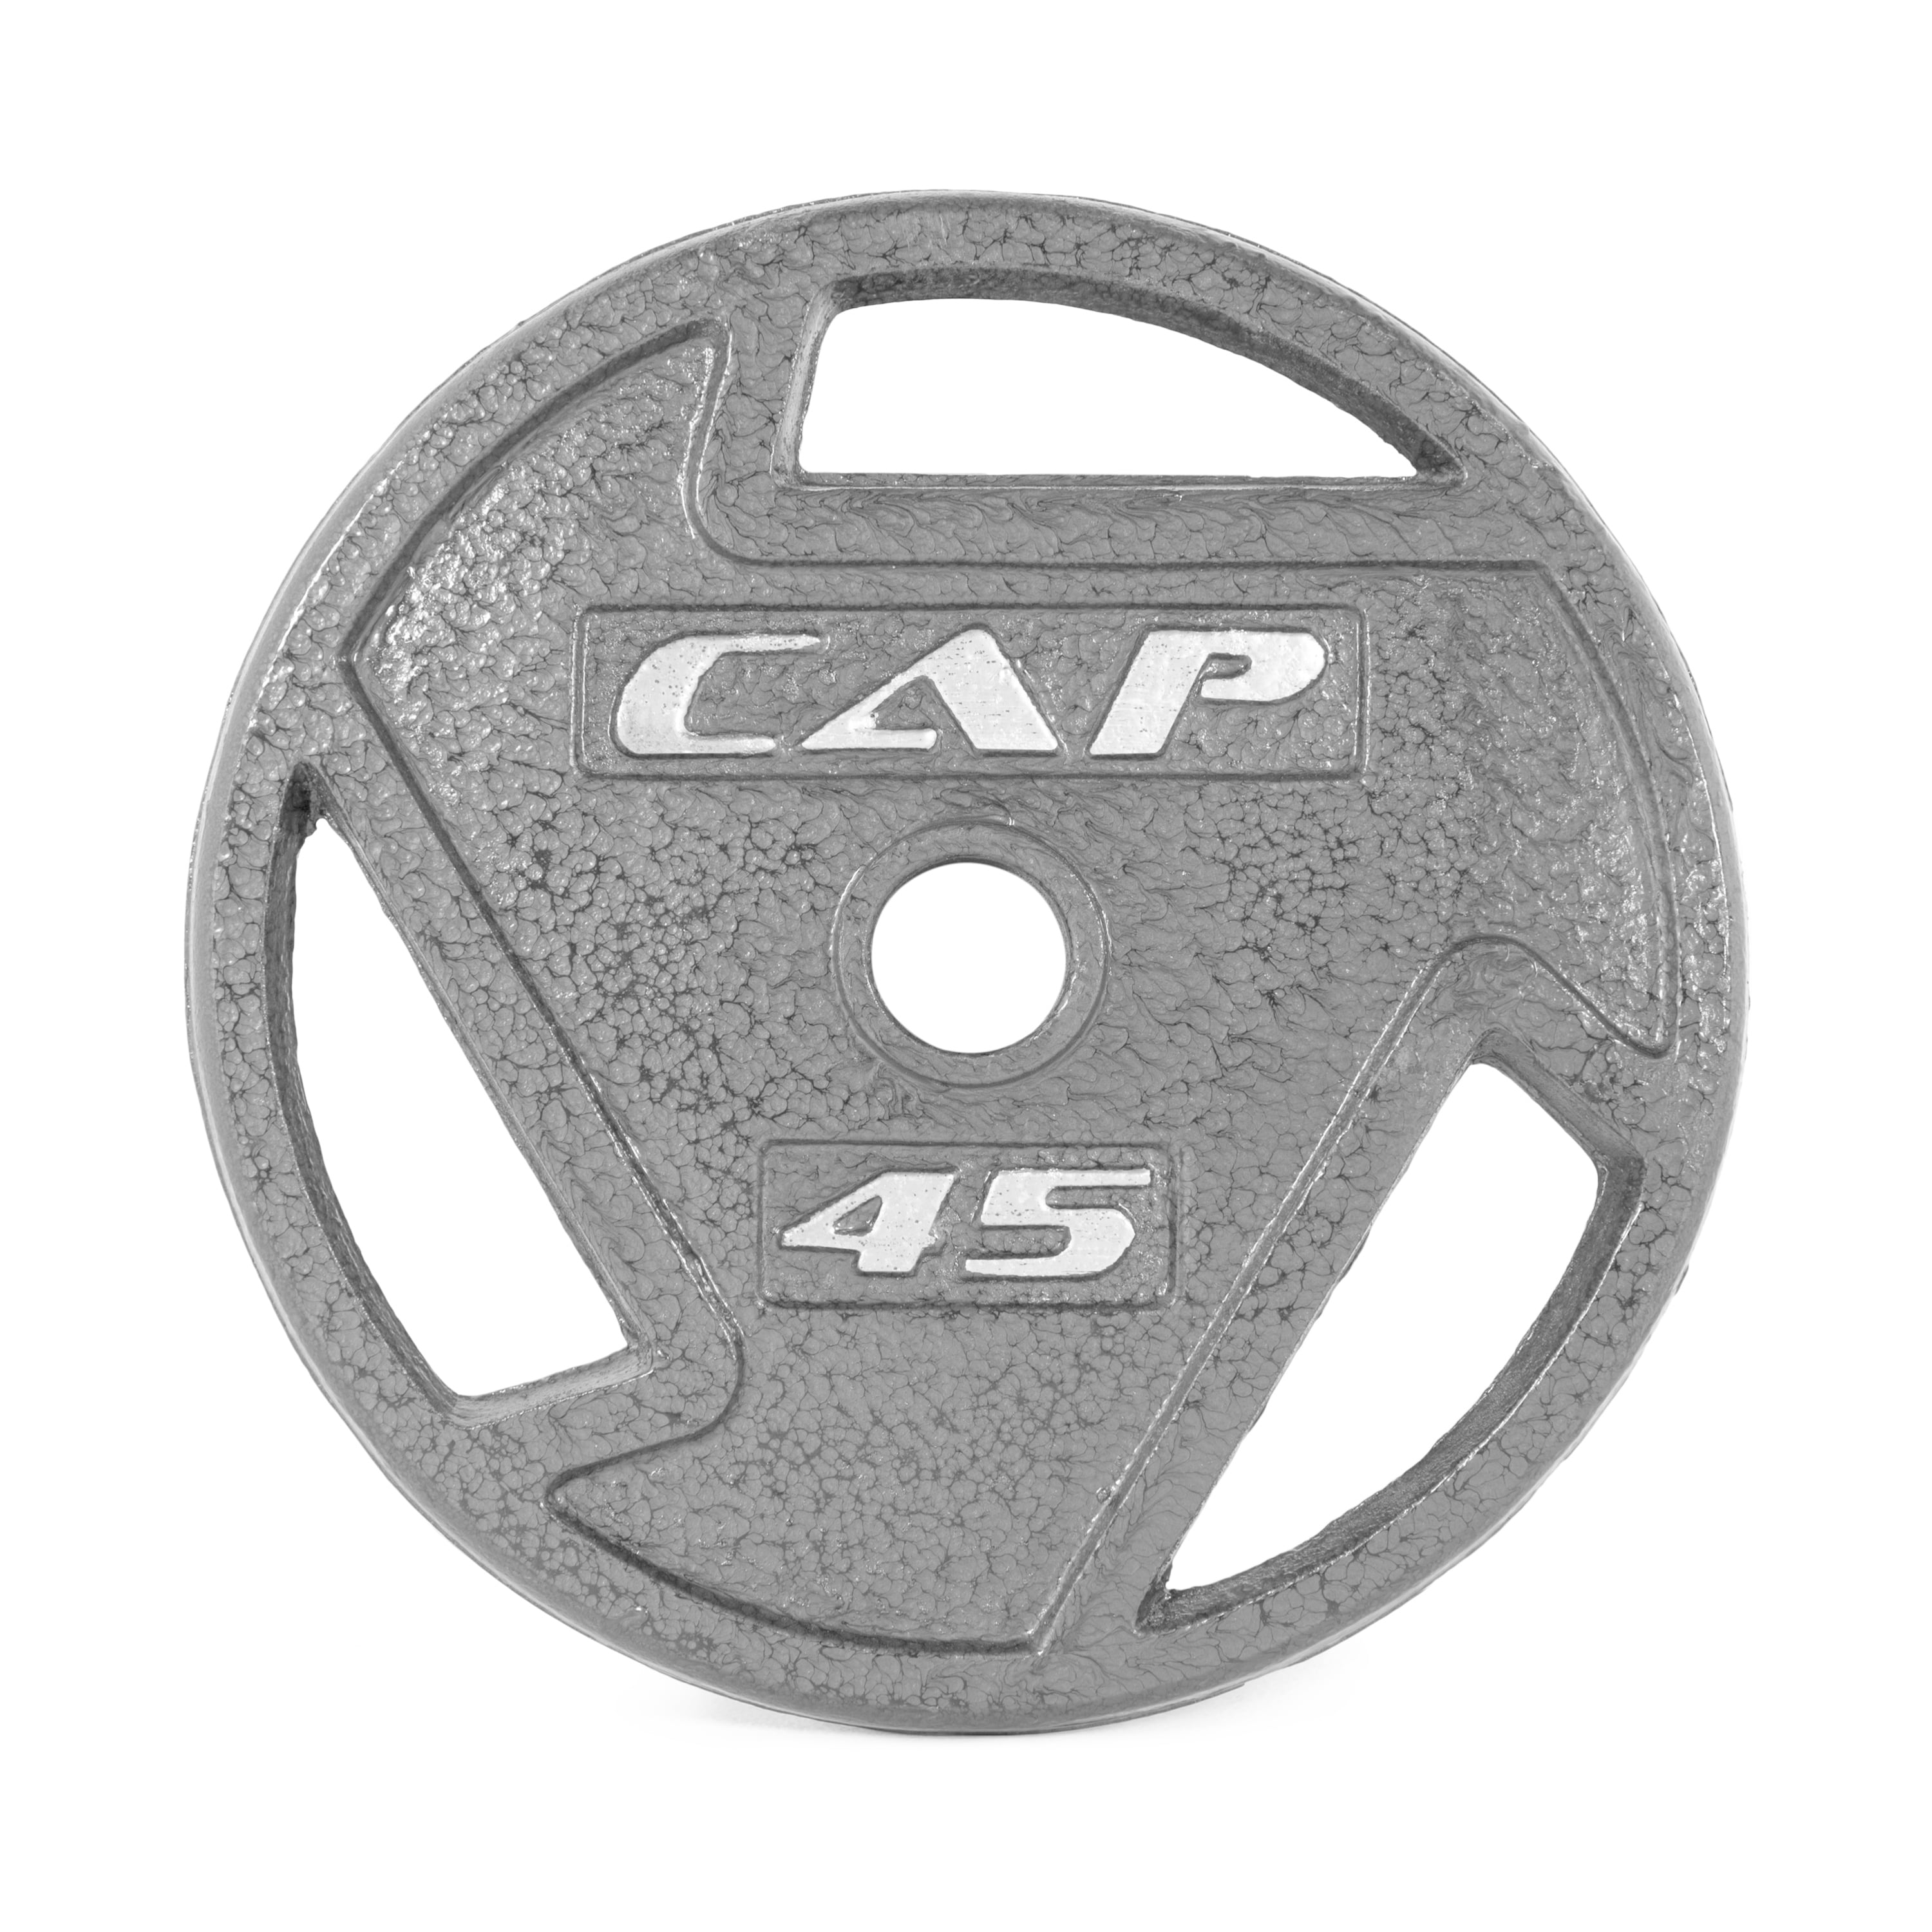 New CAP 50LB Olympic Weight Plate Set 25LB Plates Cast Iron 2INCH 2 FAST SHIP 